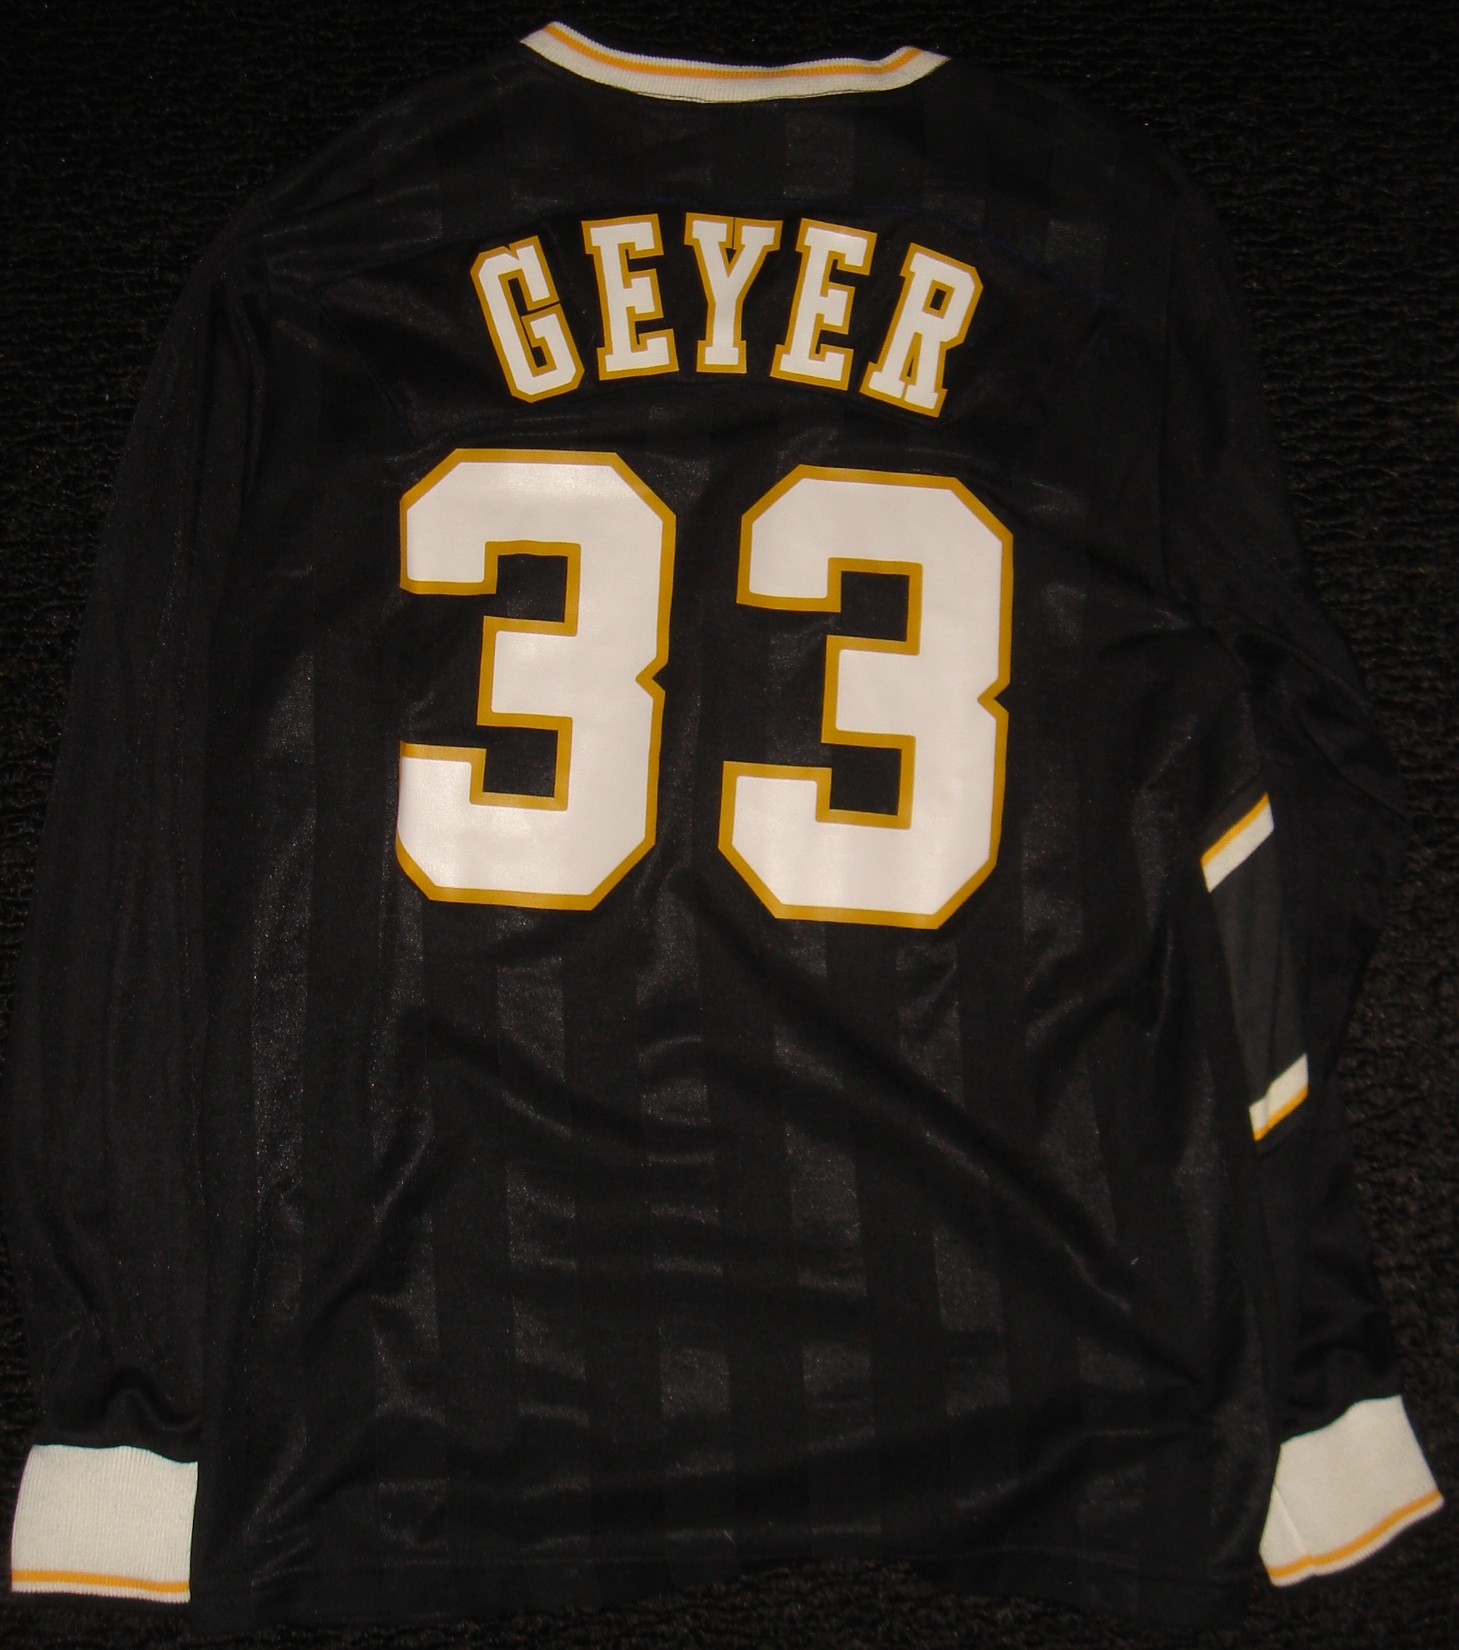  - Sting 84-85 Home Jersey Eric Geyer  Back